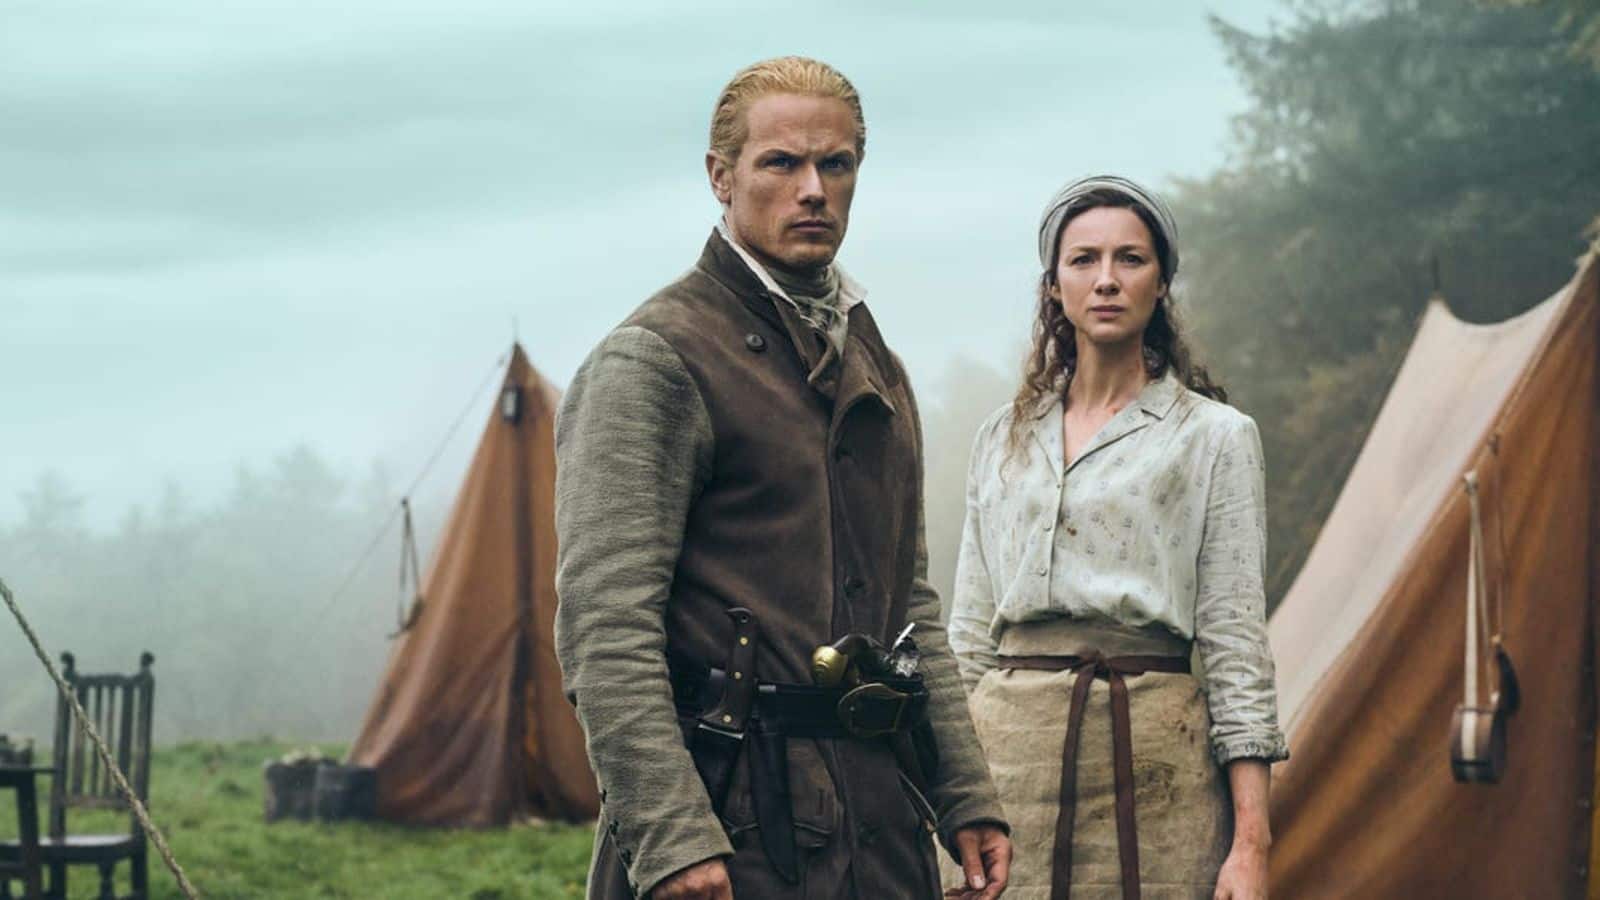 'Outlander' Season 7 return date locked: Here's what to expect